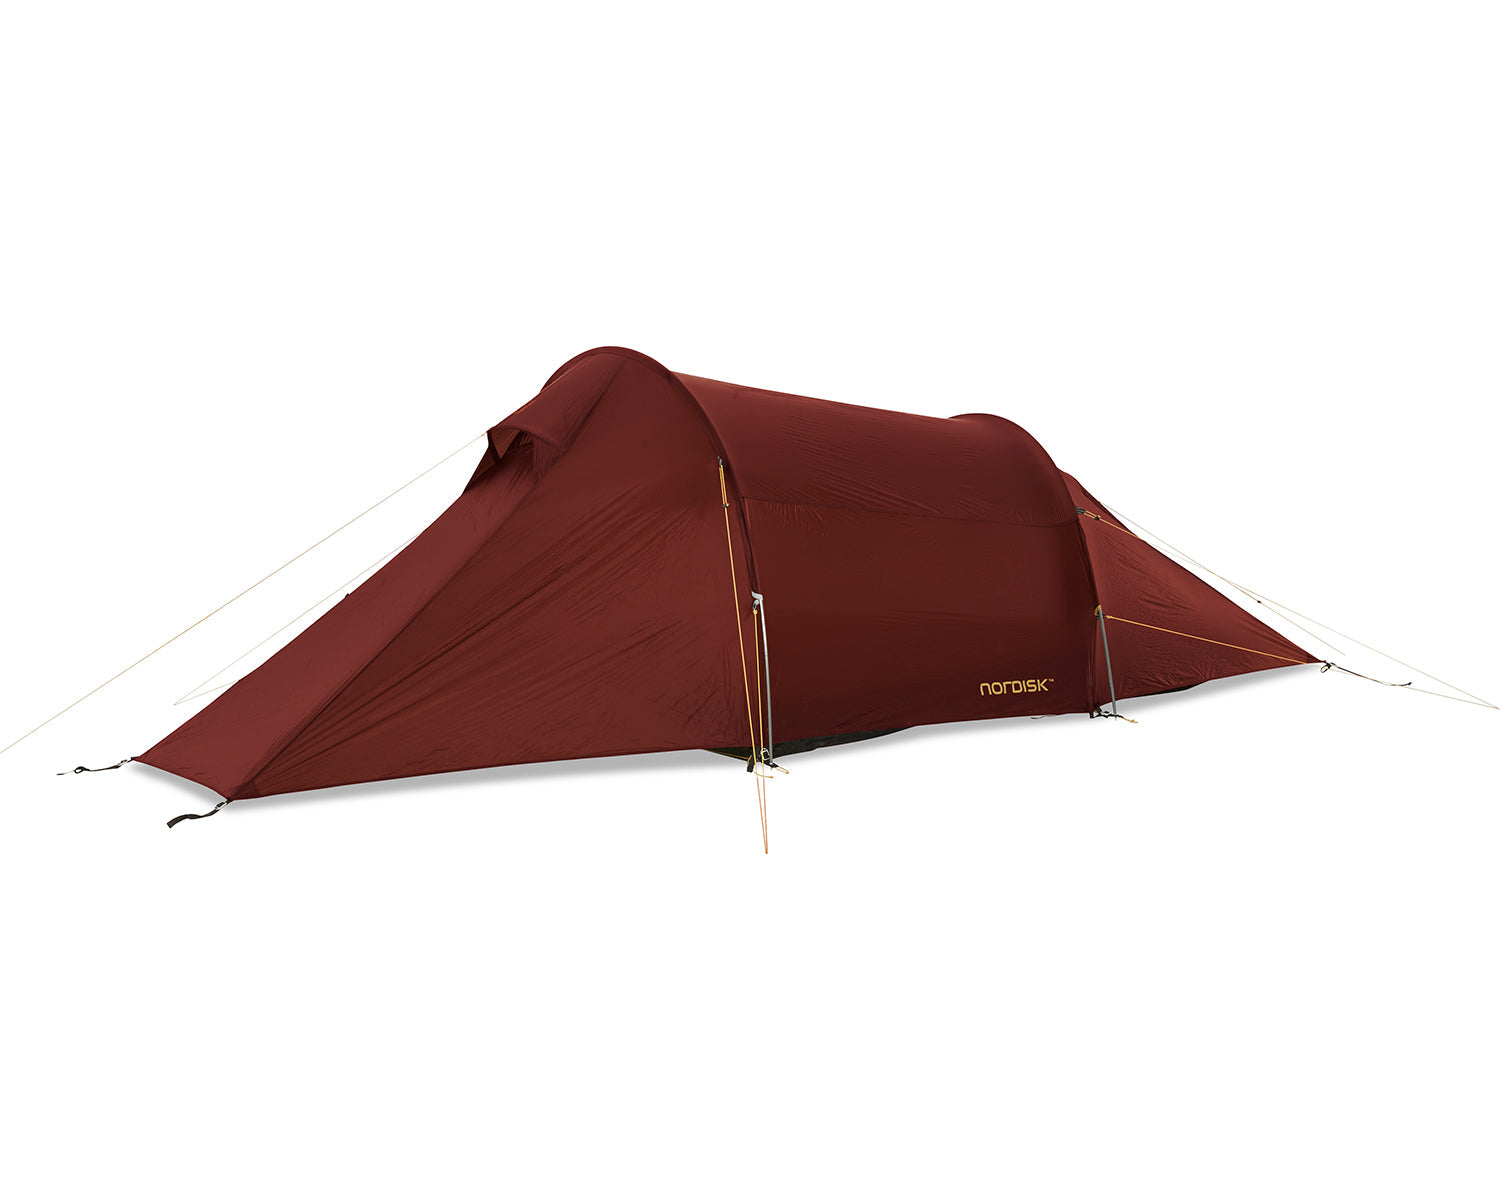 Halland 2 LW tent - 2 person - Burnt Red